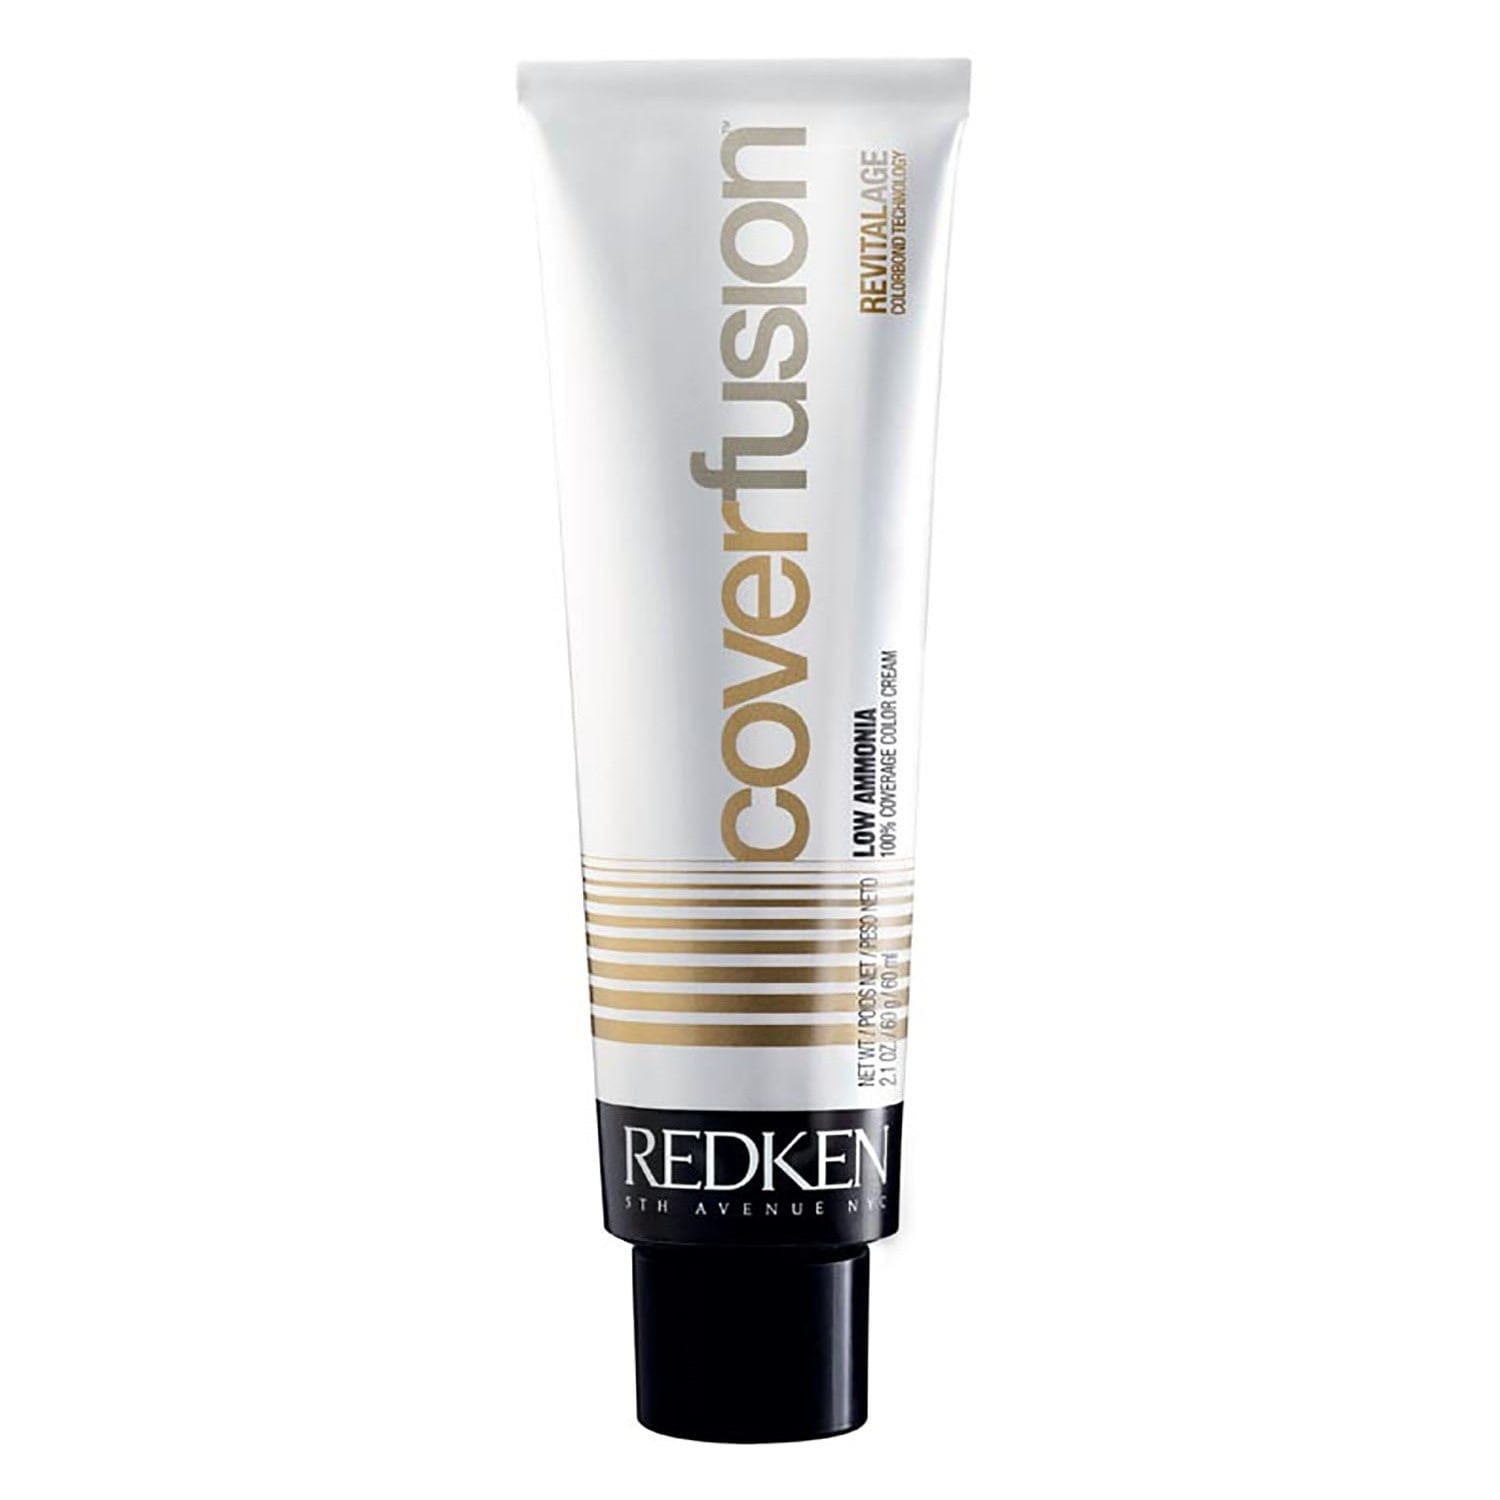 Redken® Cover Fusion 9NN LG0 - HairBeautyInk